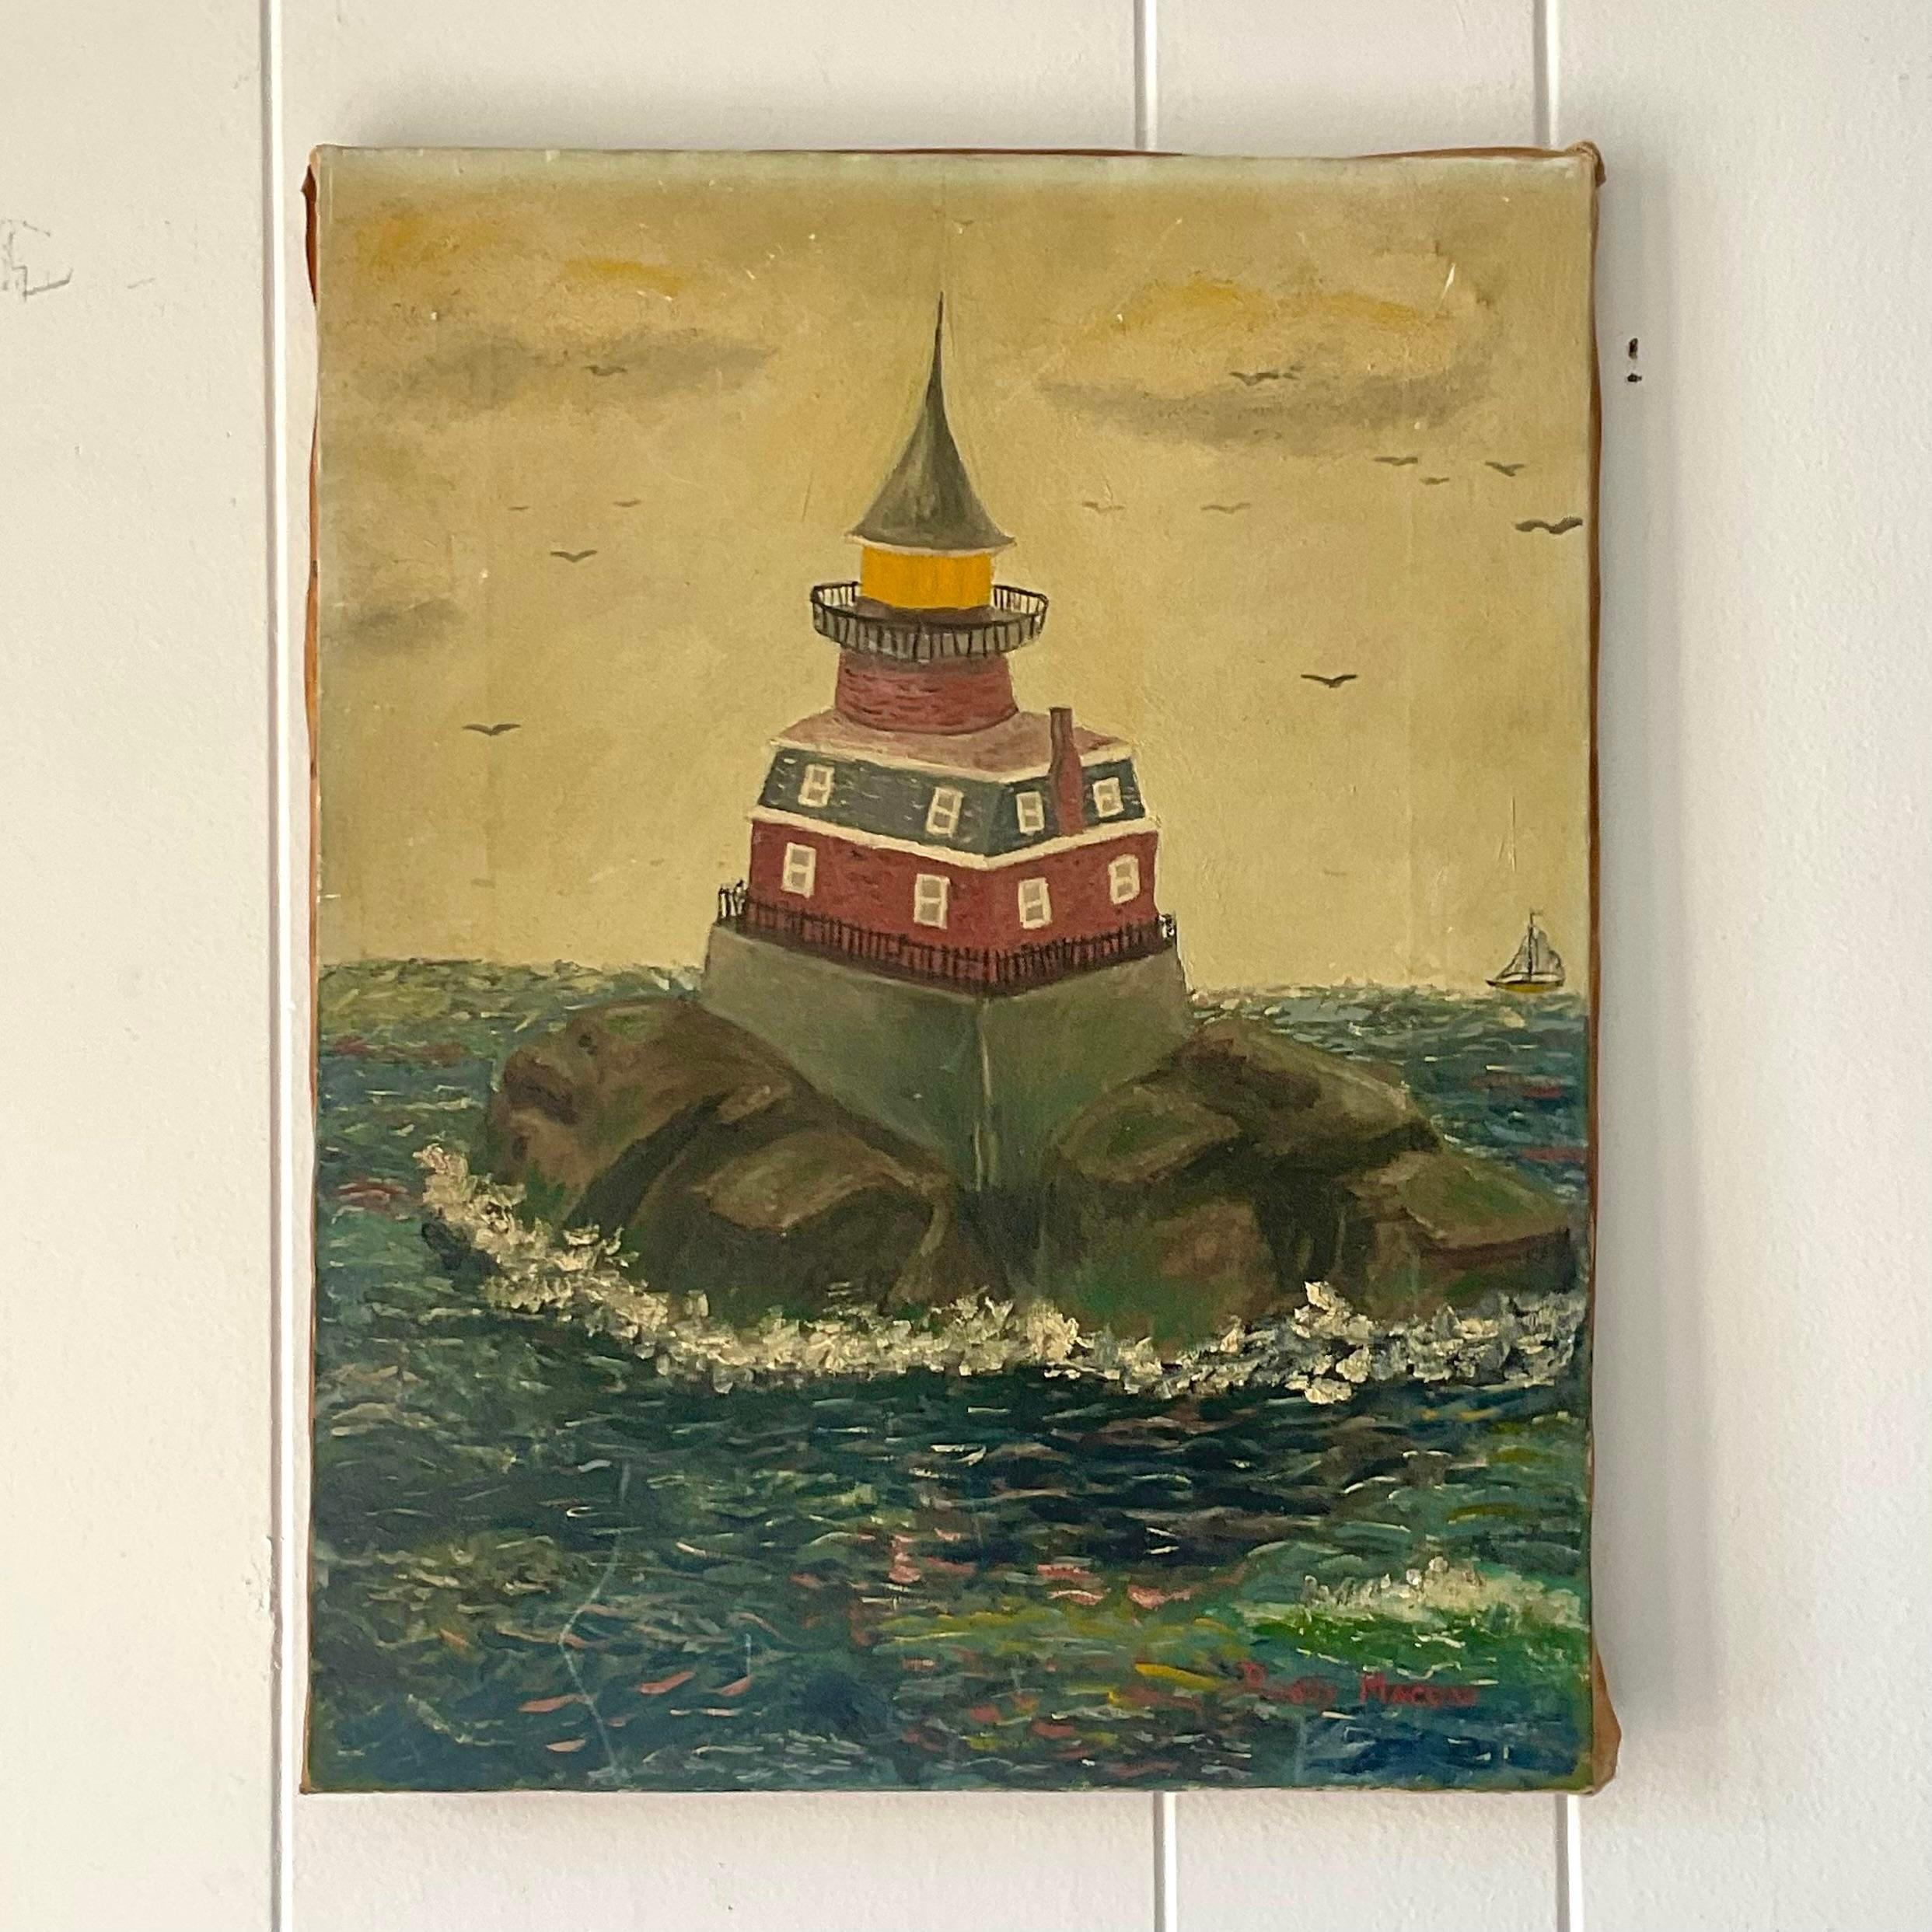 American Vintage Boho Signed Original Oil Painting of Lighthouse For Sale